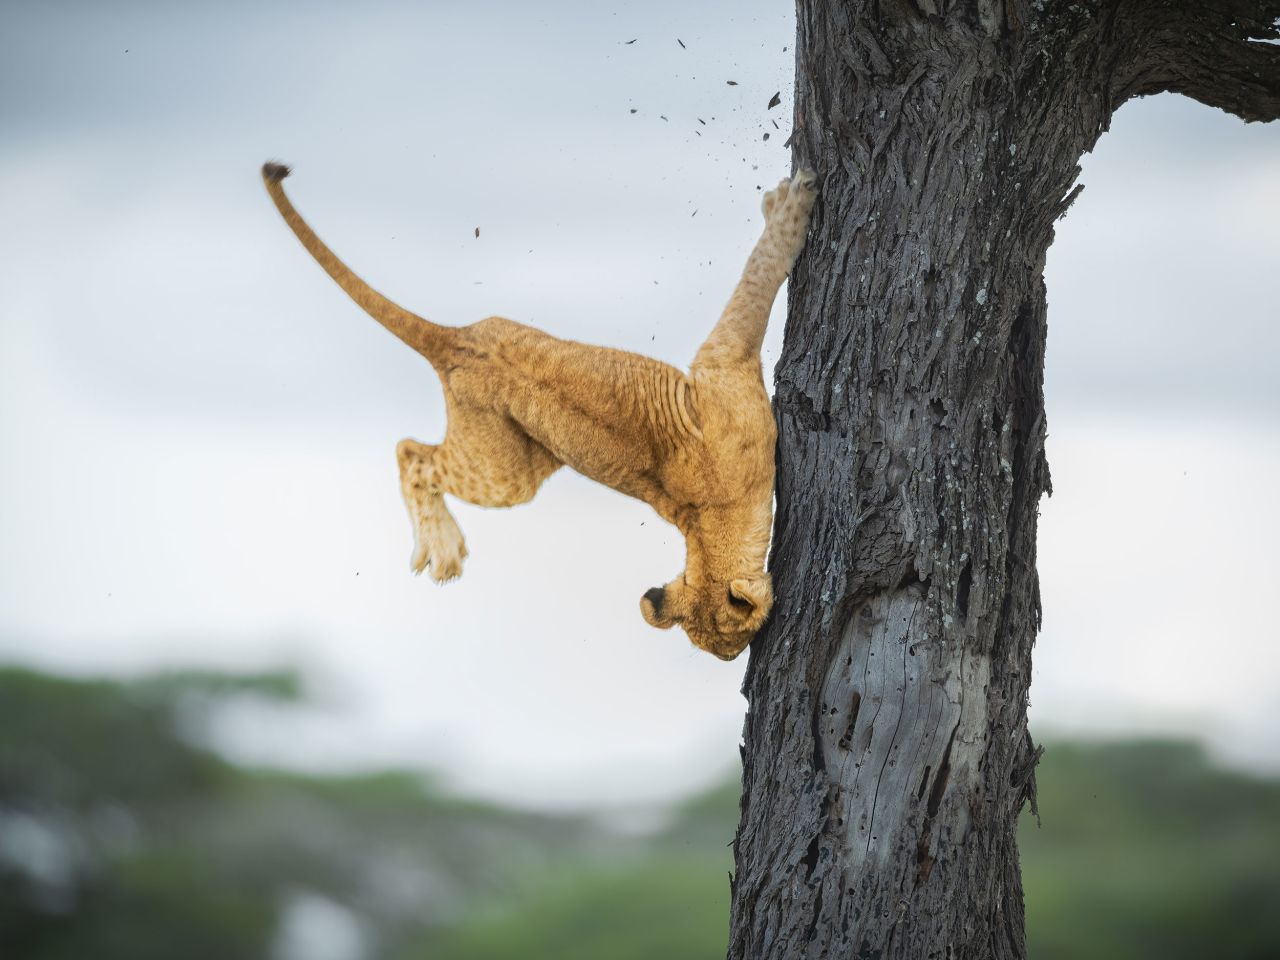 This lion cub displays its not-so cat-like reflexes in this image captured by Jennifer Hadley in the Serengeti, Tanzania.